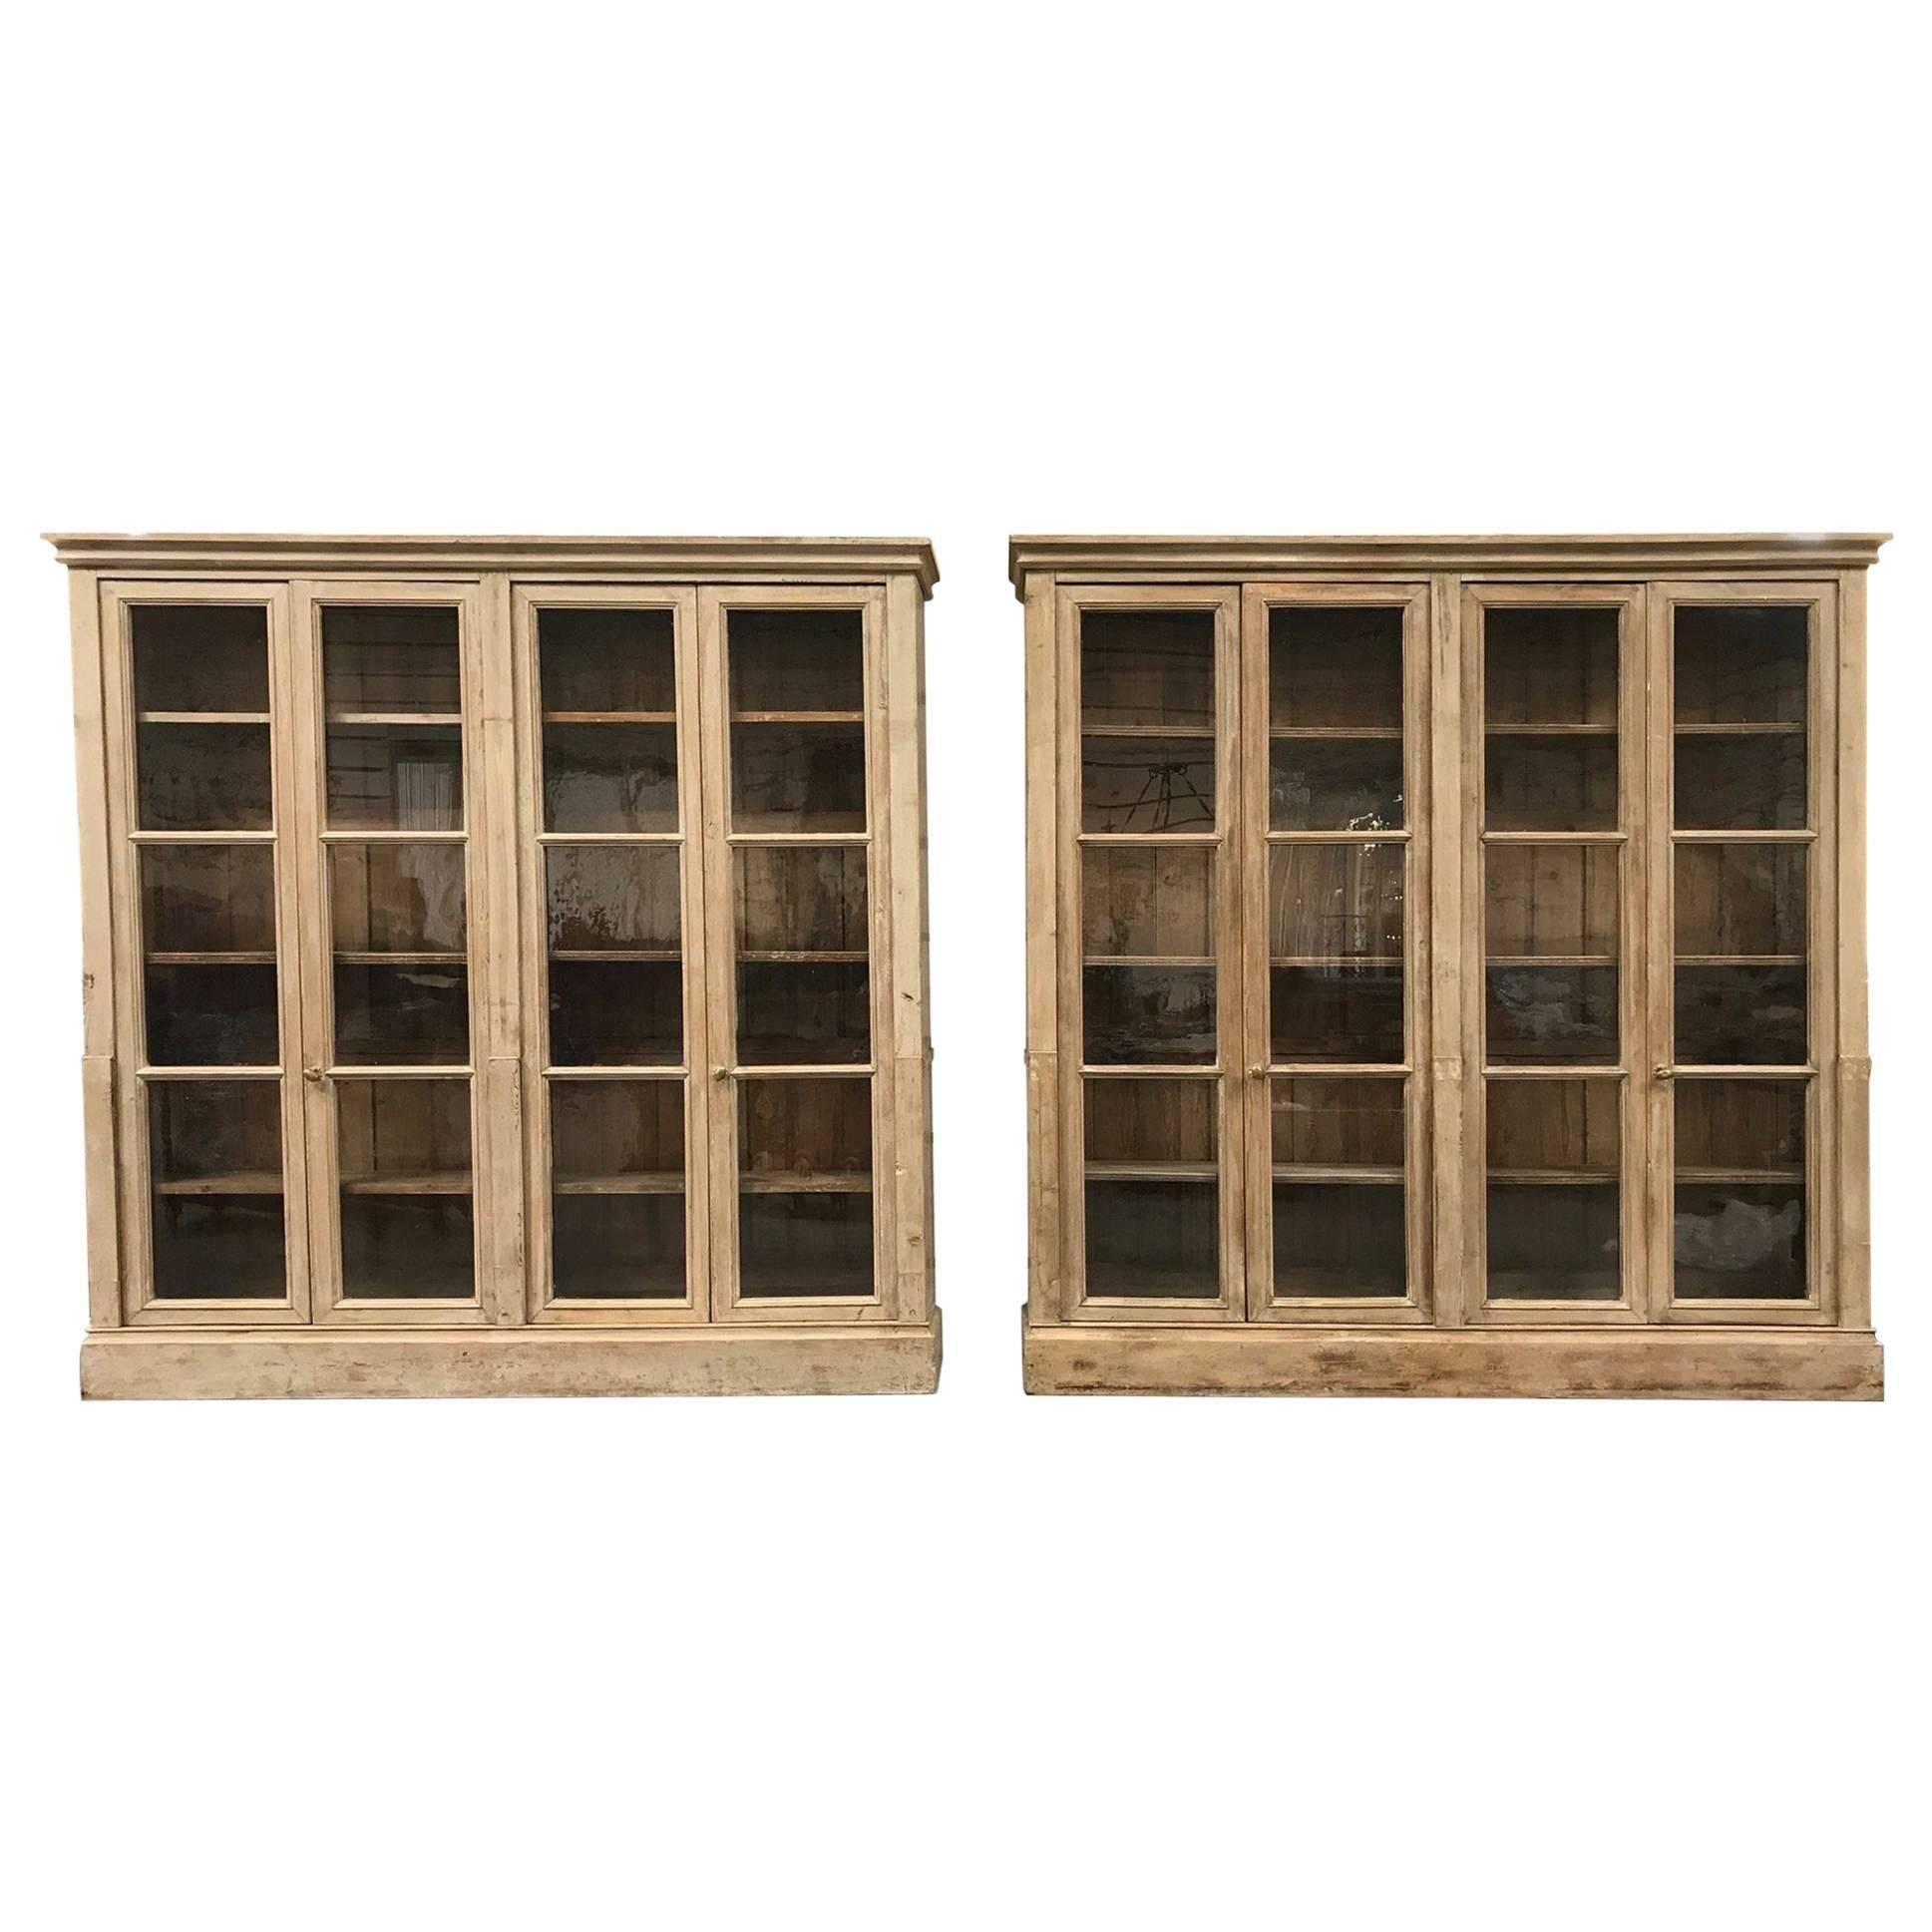 Outstanding Pair of Mid-19th Century French Bookcases